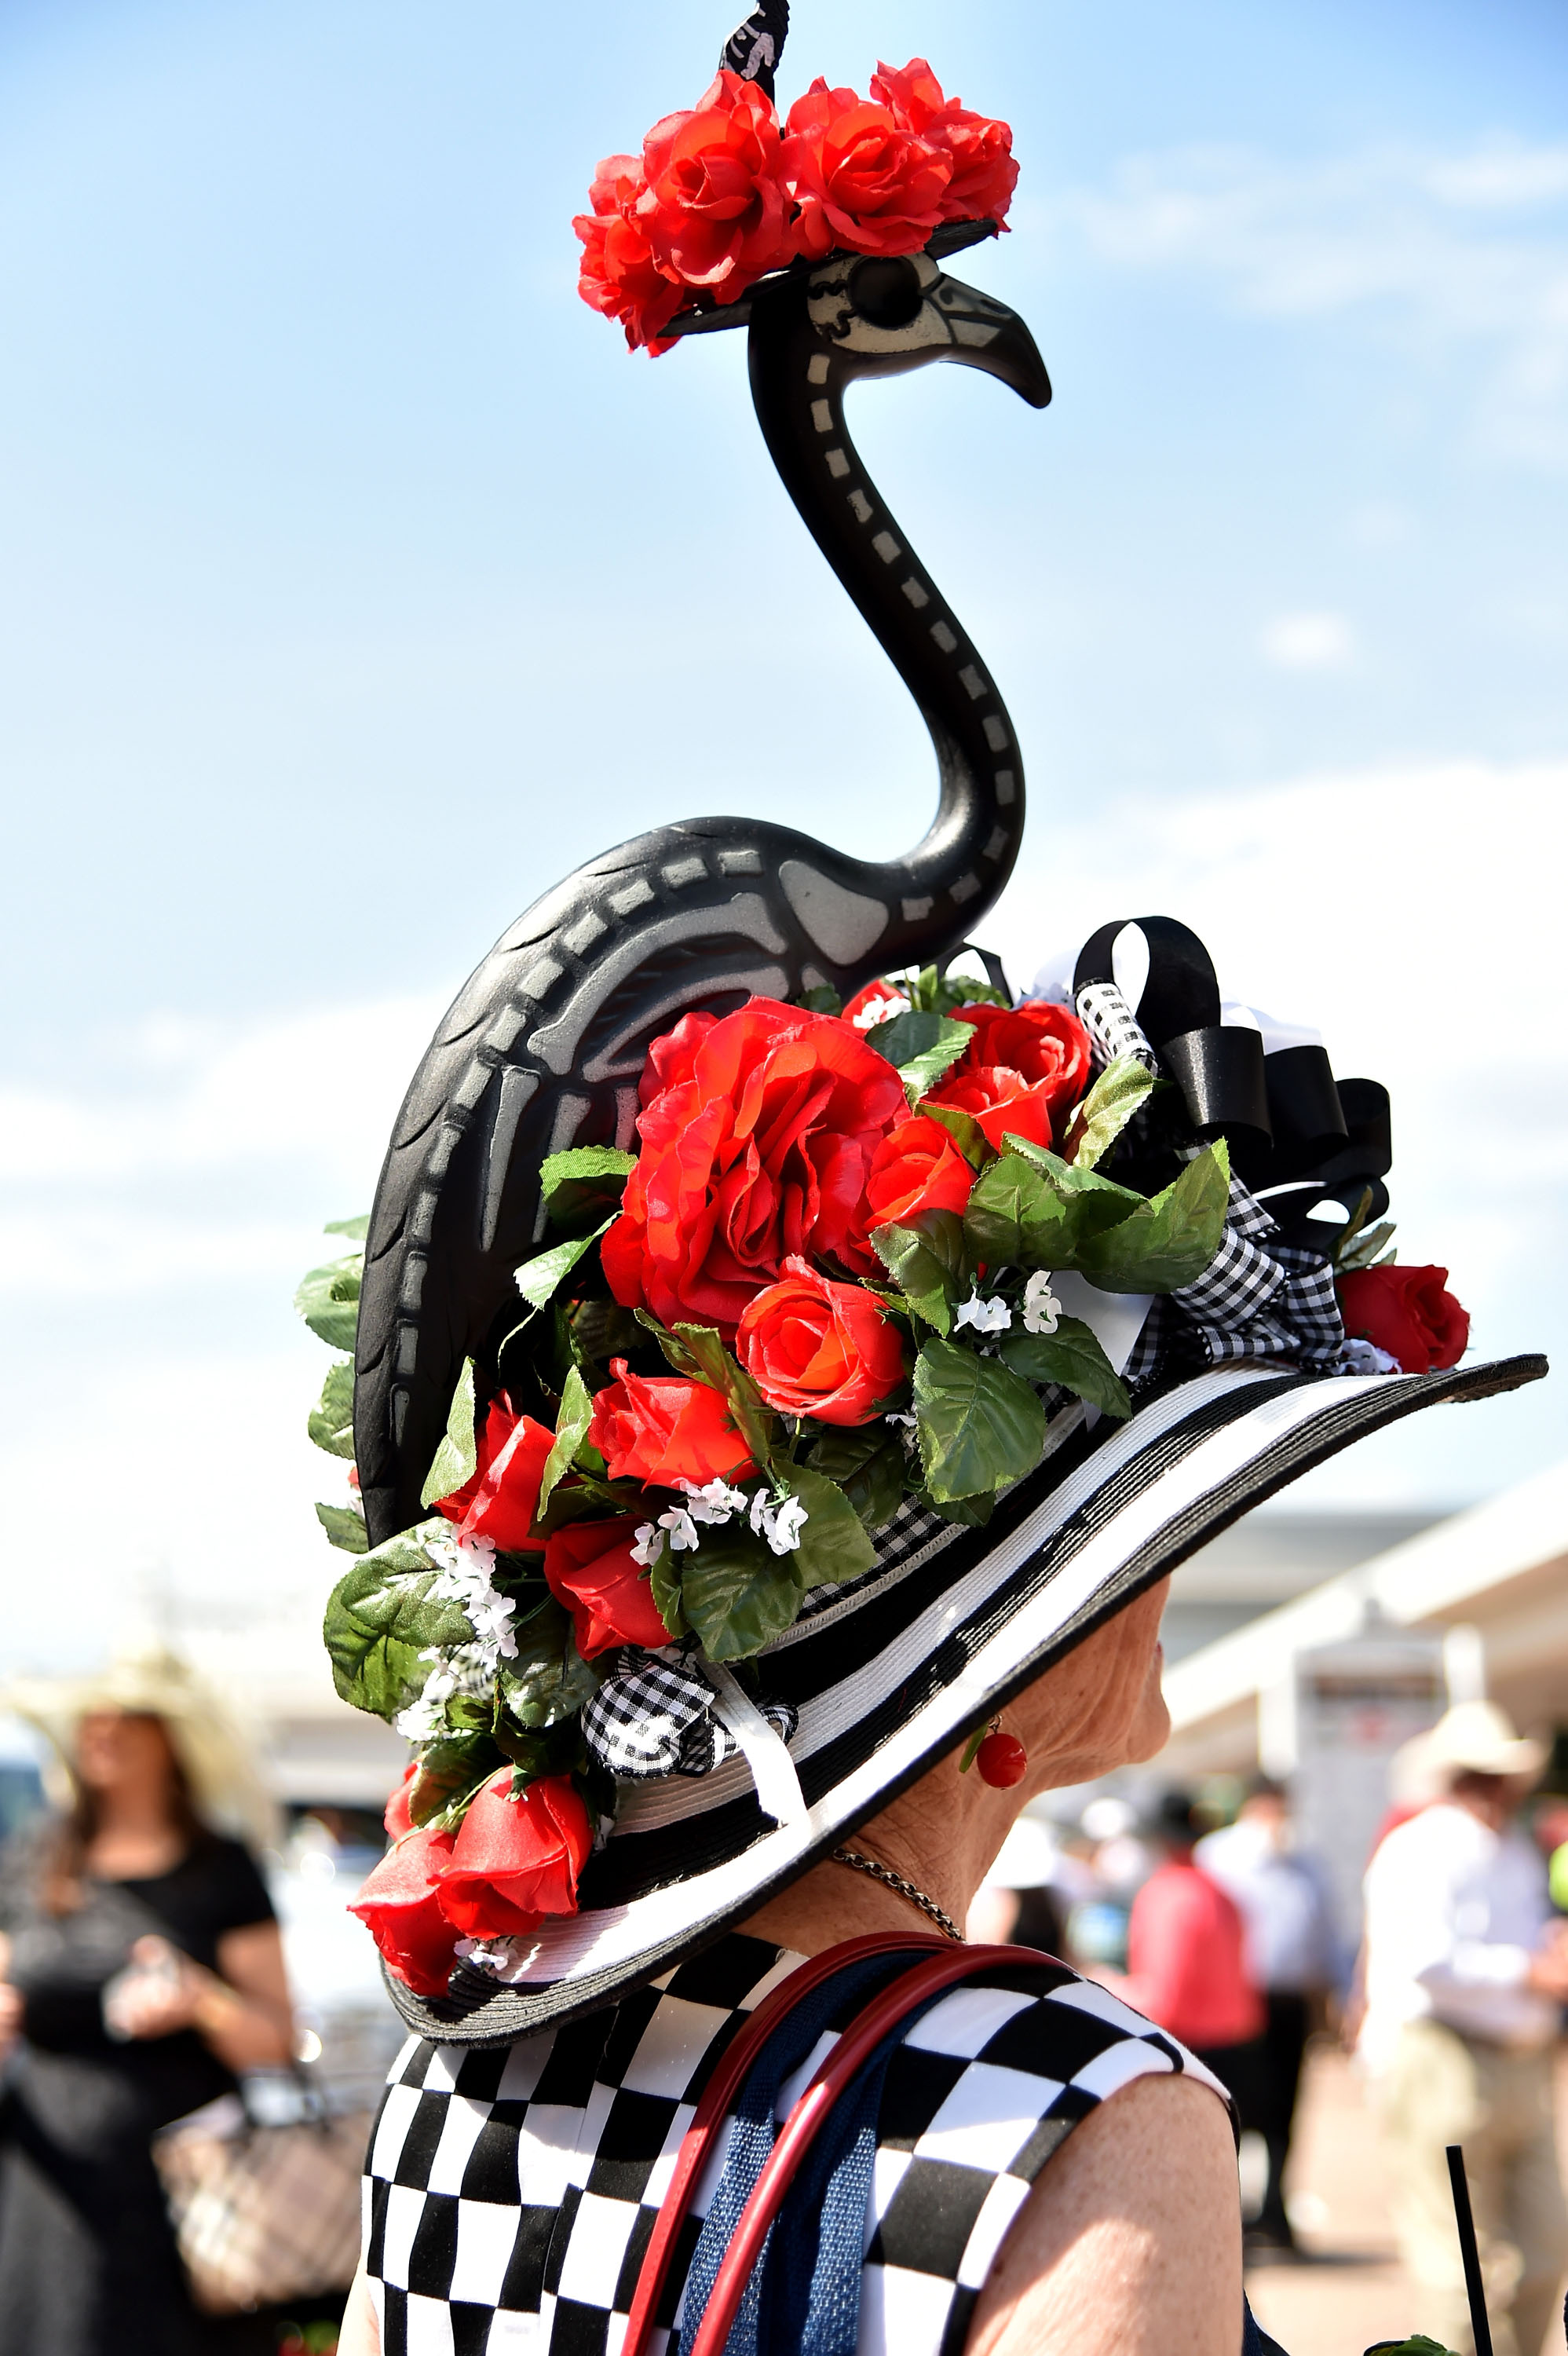 Woman with a hat during the 142nd running of the Kentucky Oaks horse race at Churchill Downs on May 7, 2016, in Louisville, Ky.